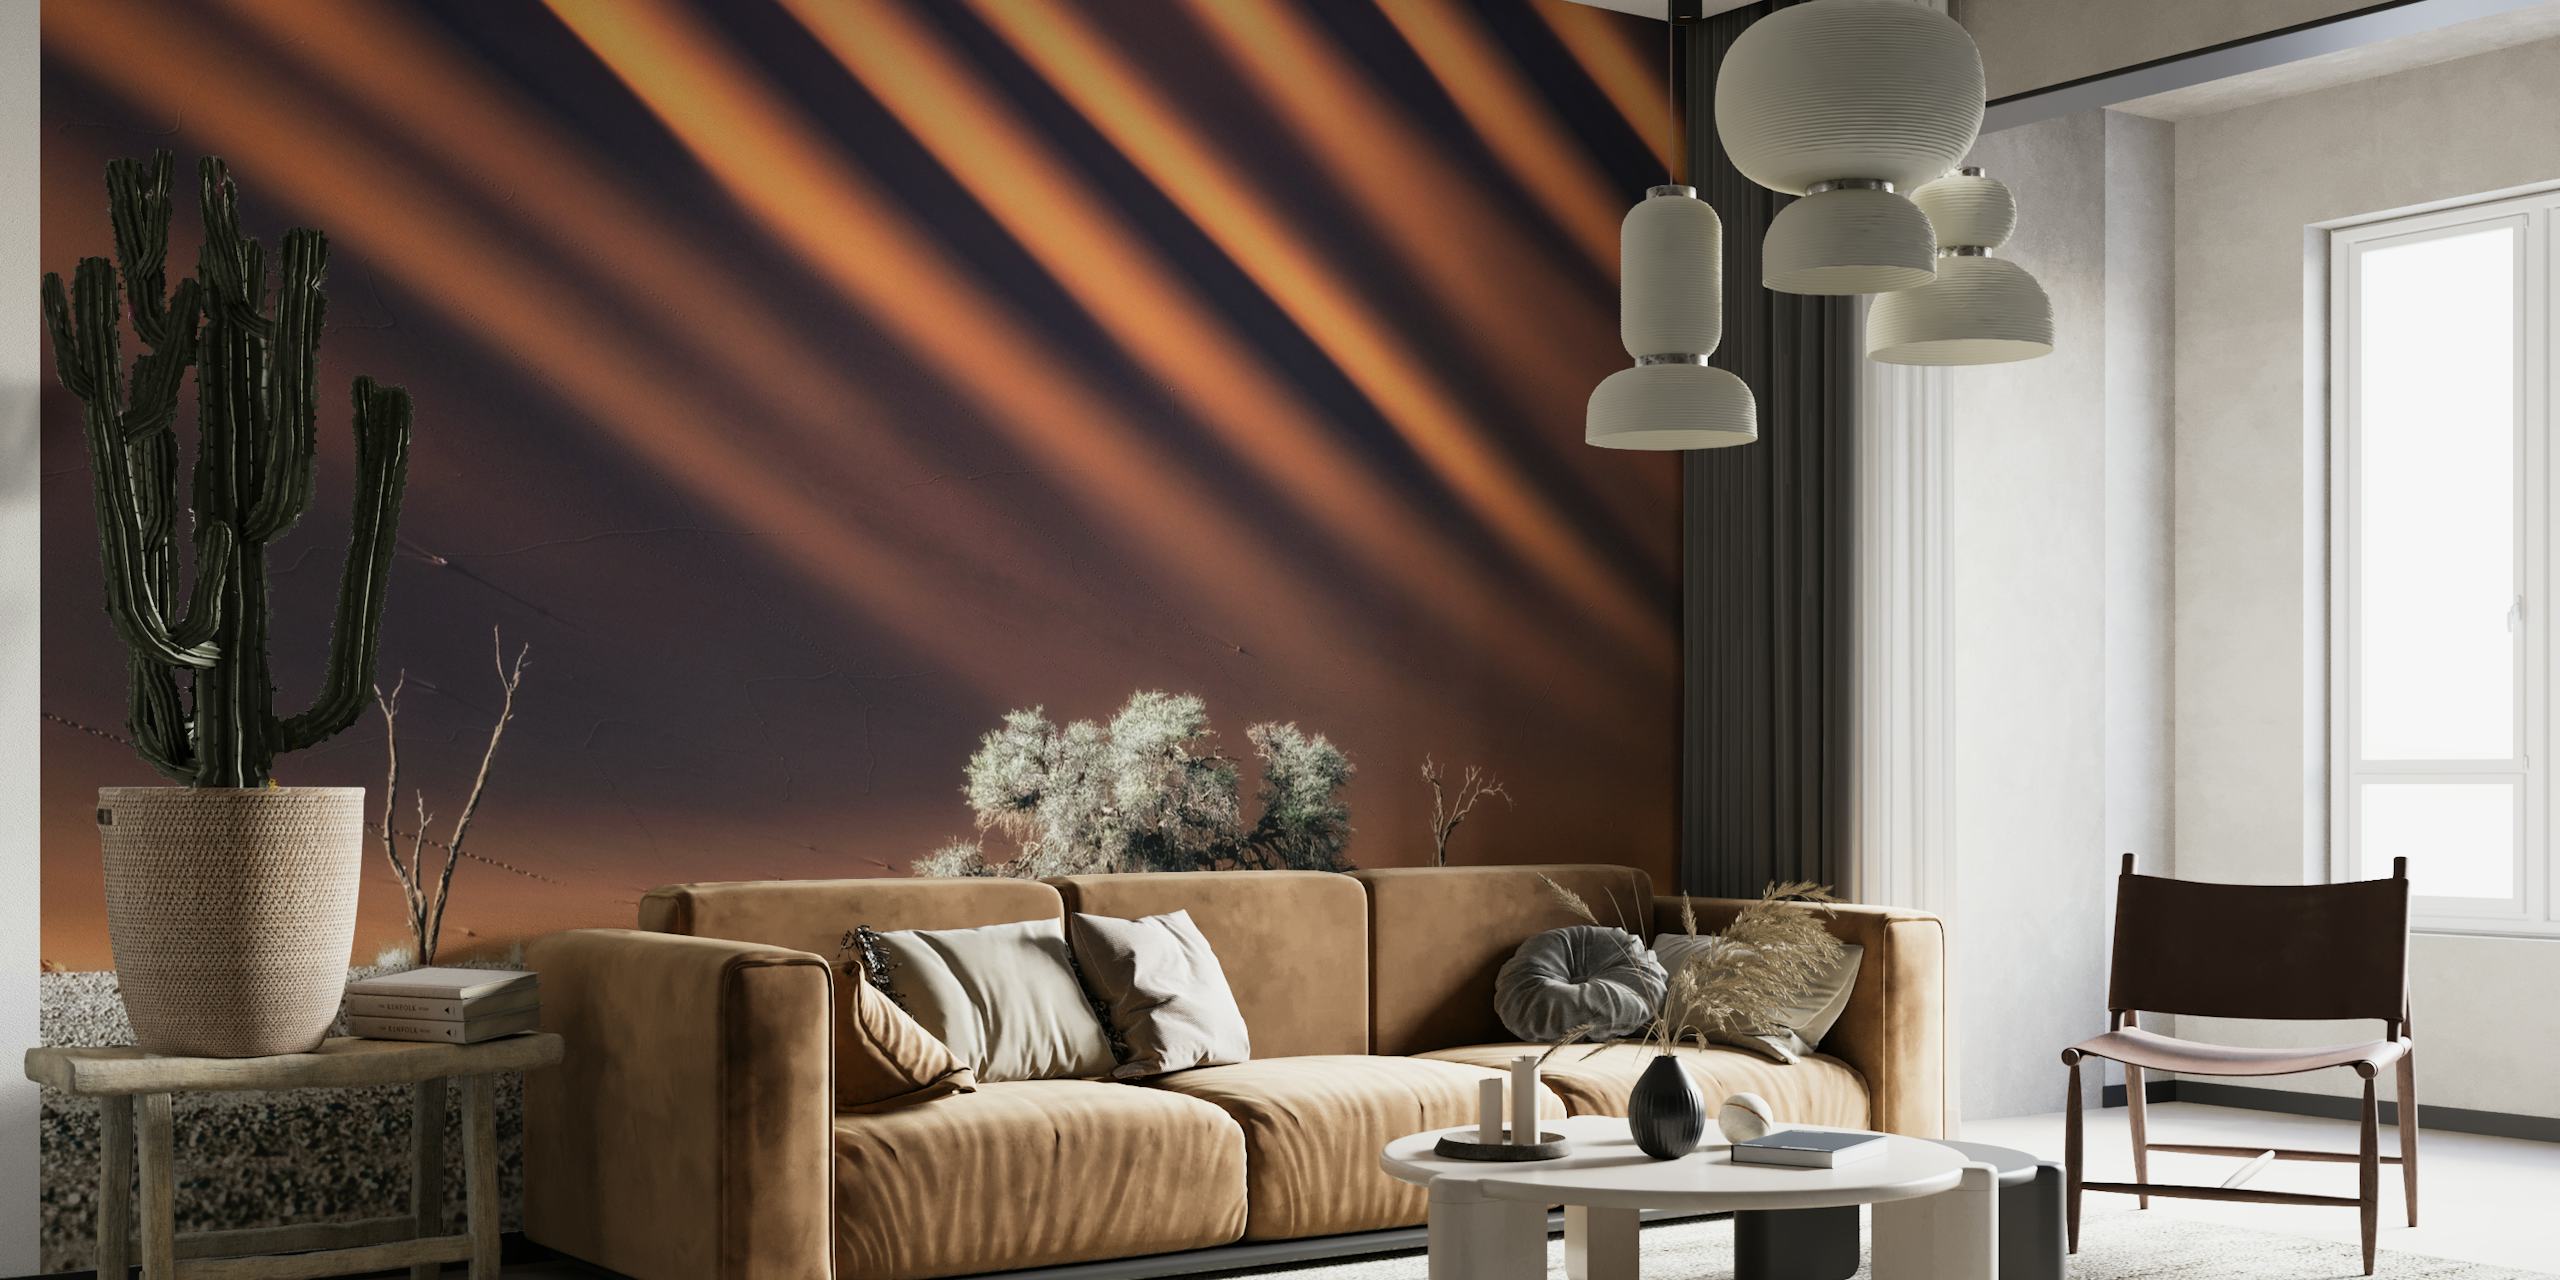 Abstract landscape wall mural with sky patterns and warm earthy tones on happywall.com